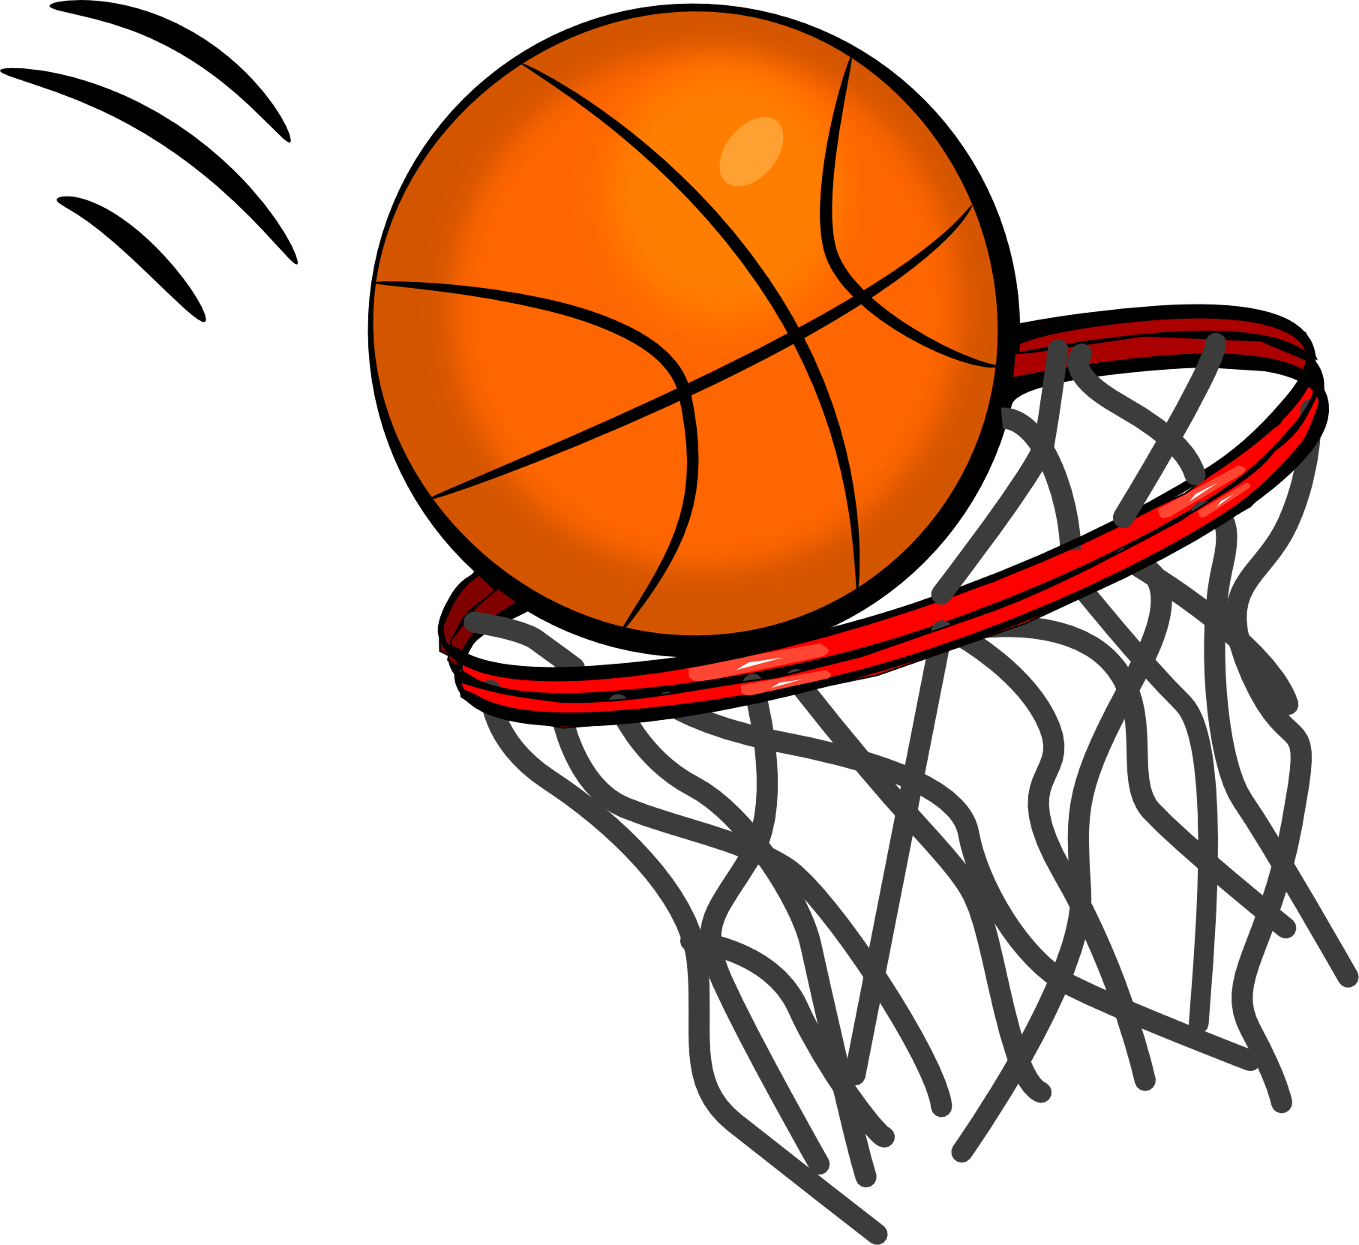 Basketball Hoop Side View Clipart | Clipart library - Free Clipart 